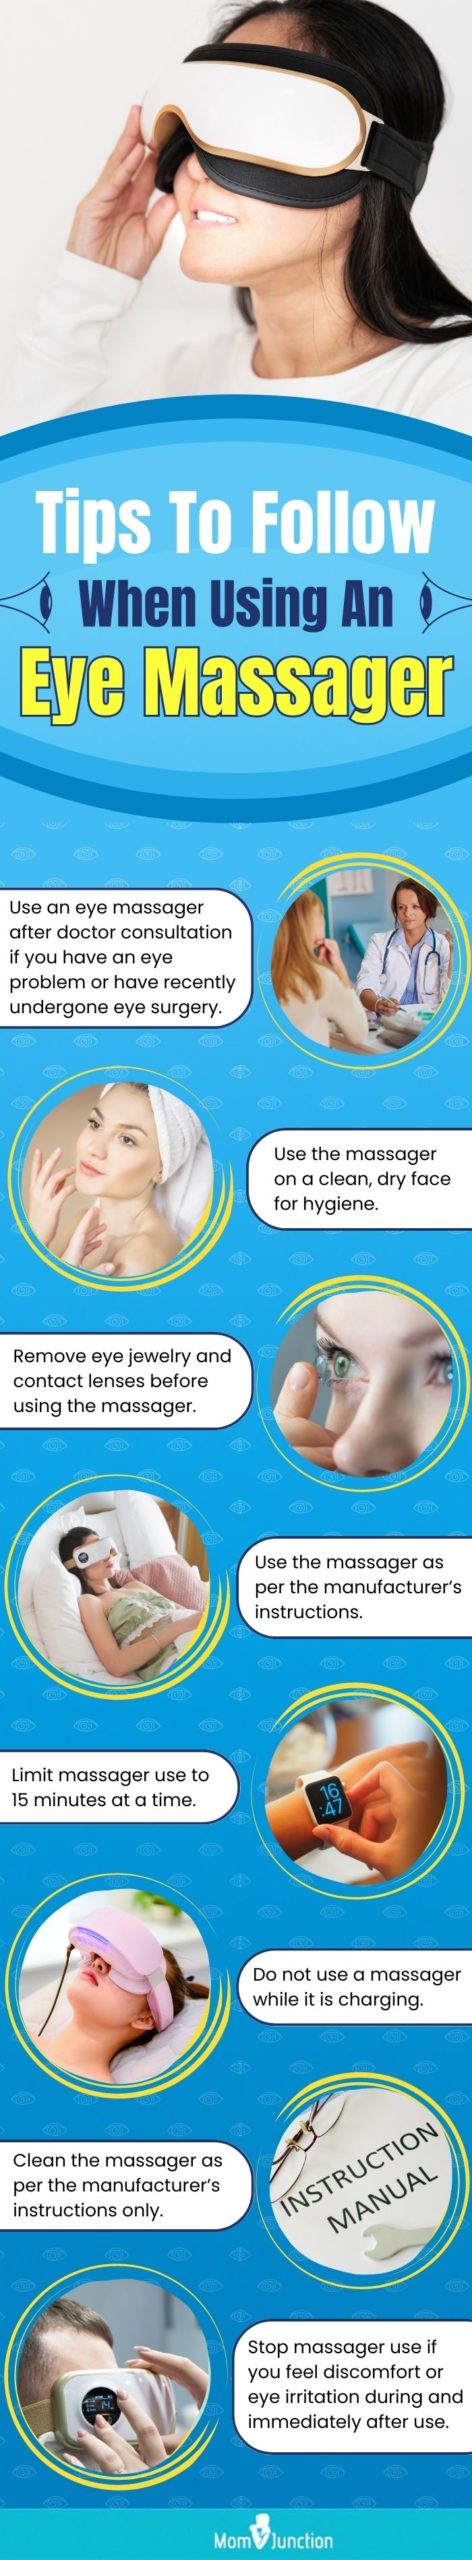 Tips To Follow When Using An Eye Massager (infographic)